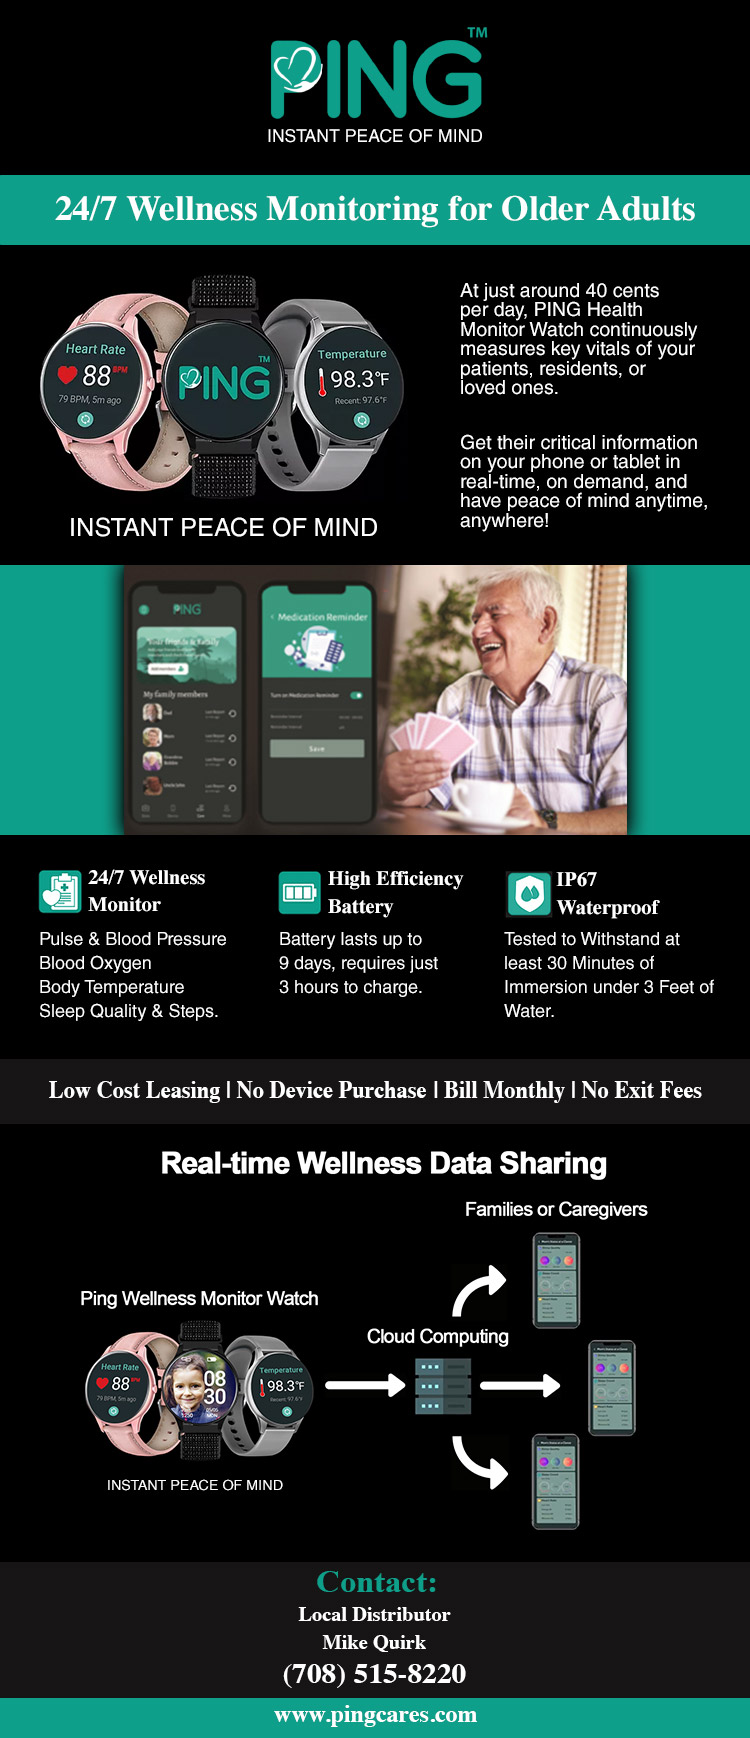 PING - PEACE OF MIND MADE INSTANT